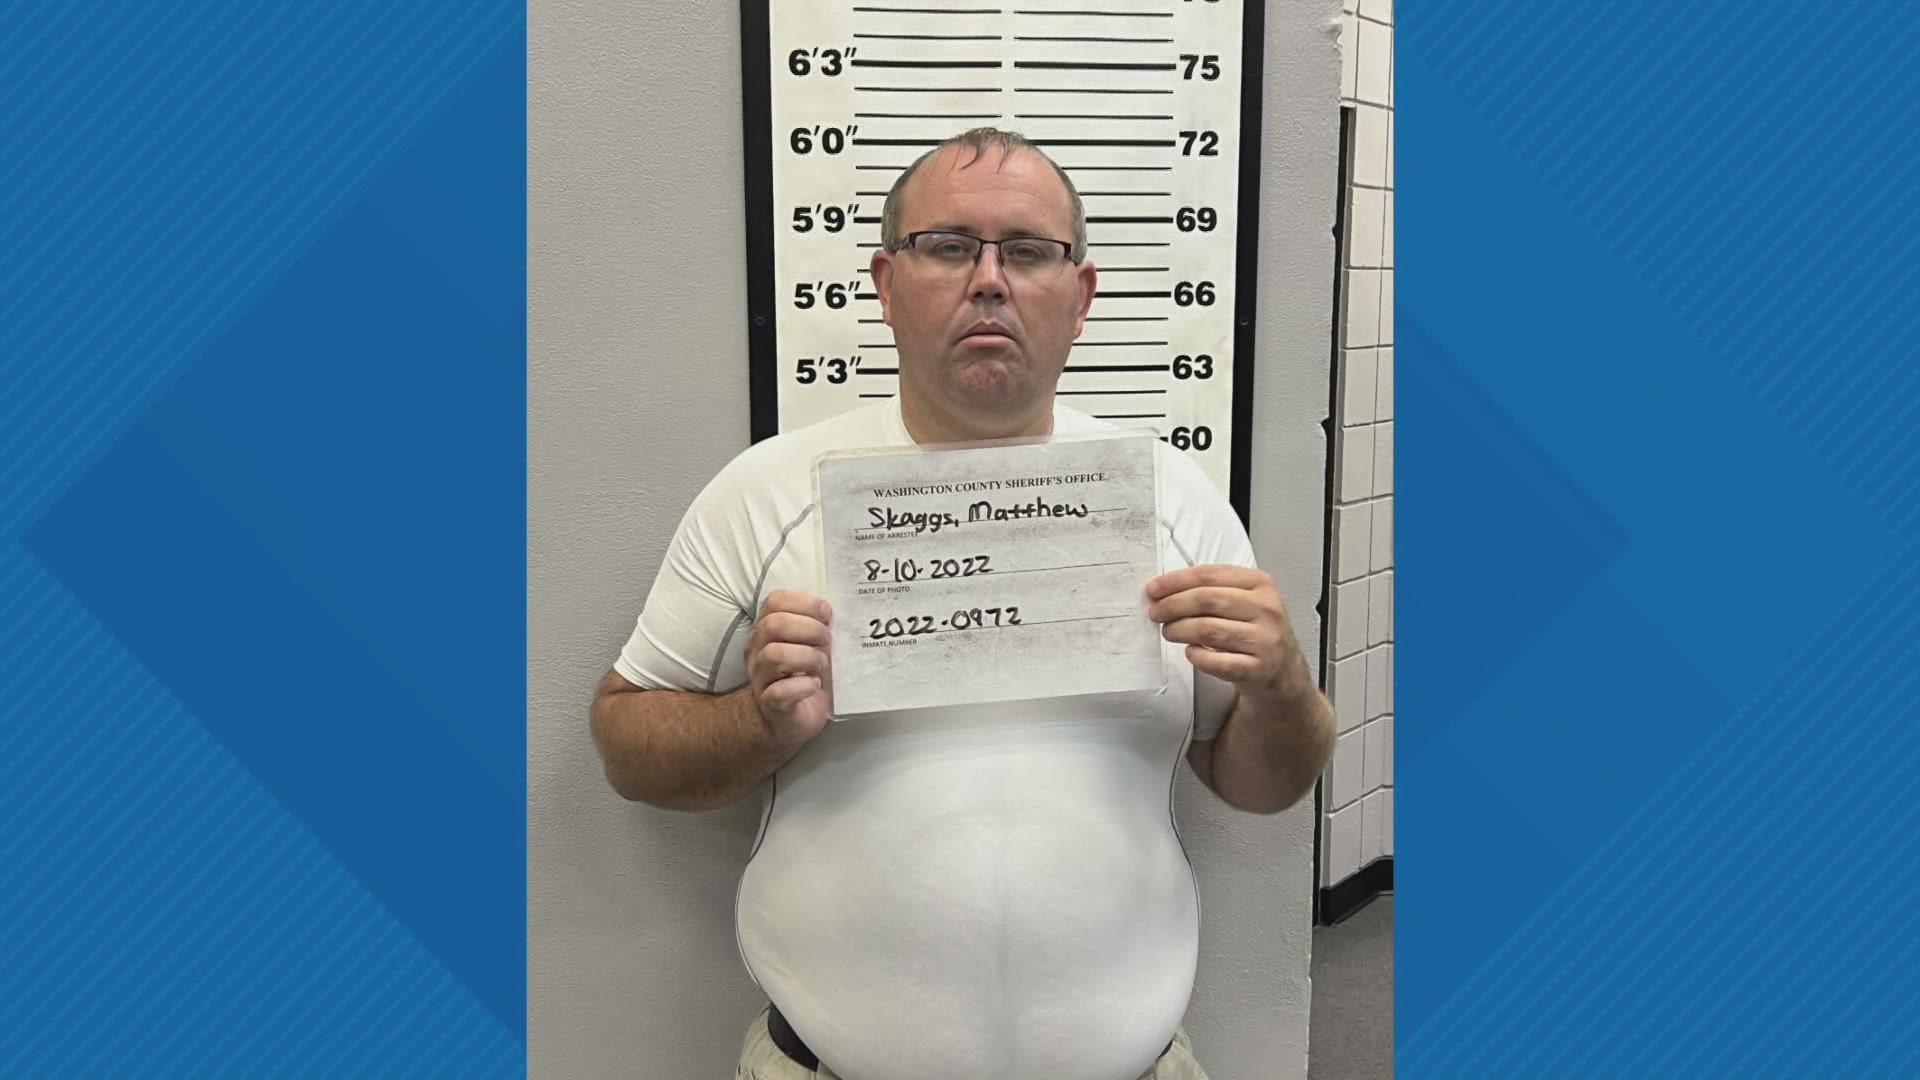 Officer Matthew Skaggs resigned as a Potosi police officer. He's now facing multiple charges in connection with alleged child sex crimes.